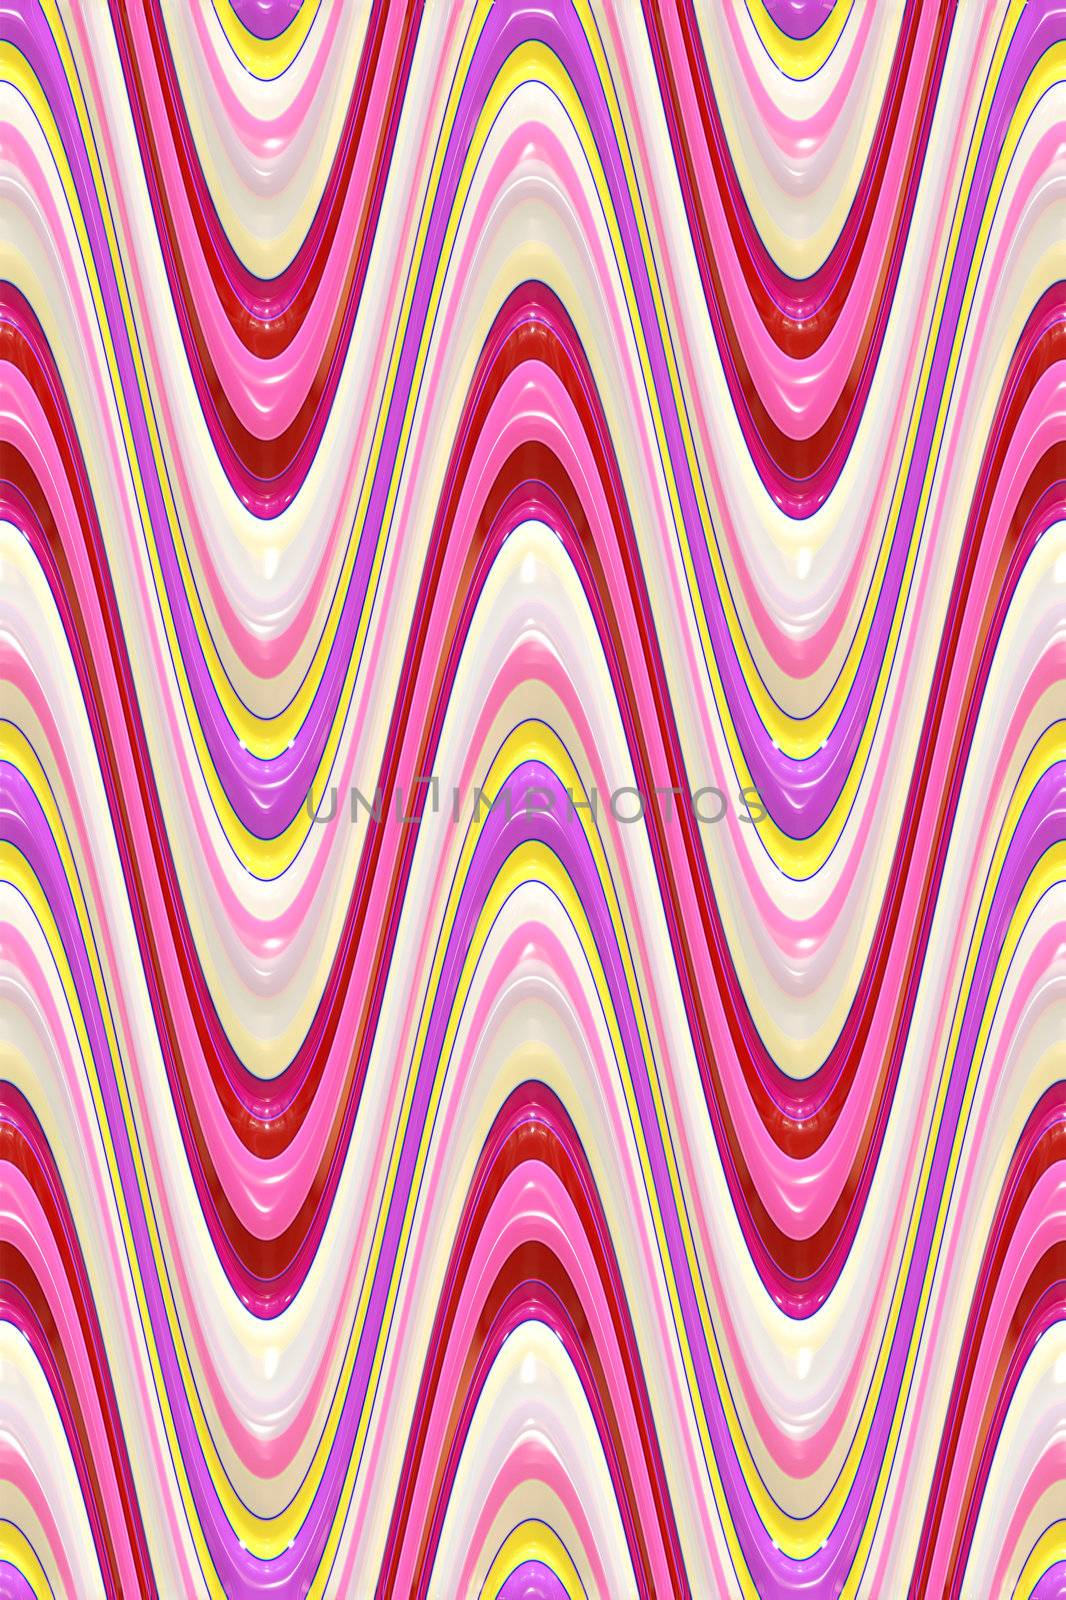 3d red wave pattern by weknow